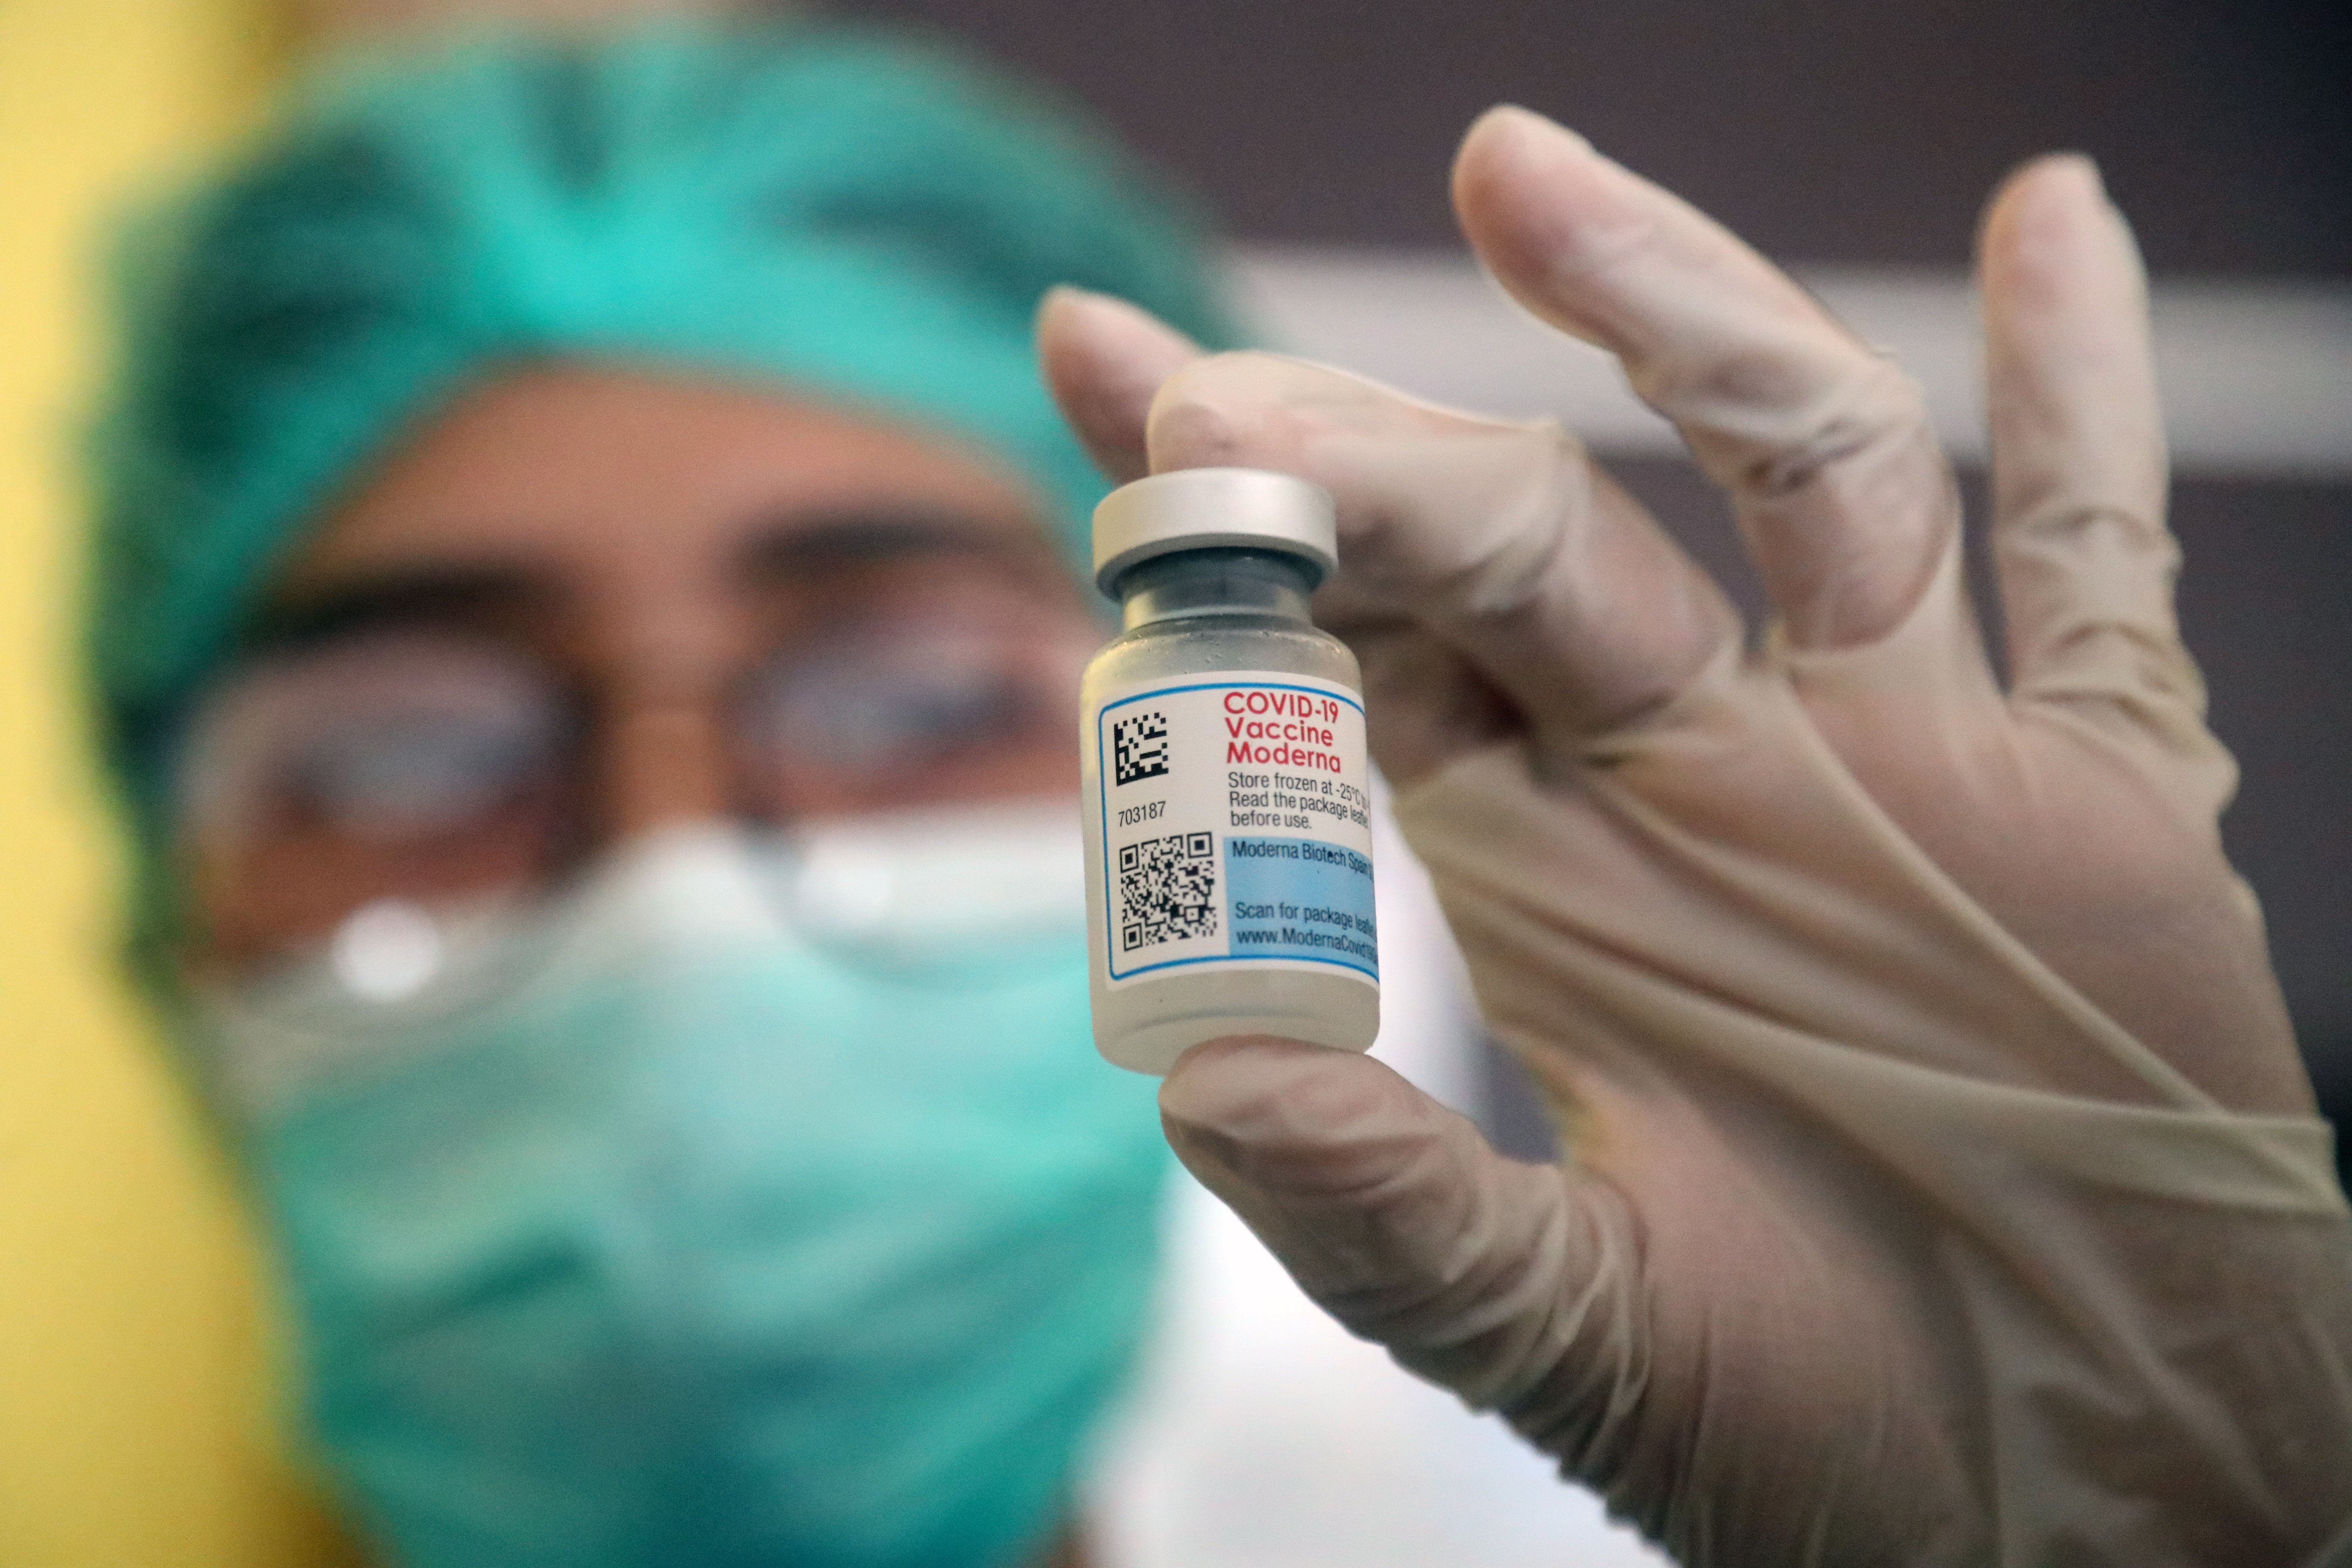 An Indonesian health worker displays a Moderna vaccine vial before administering a dose to her coworkers during a COVID-19 booster vaccination drive in Jakarta, Indonesia, Aug. 2 2022. (EPA PHOTO)